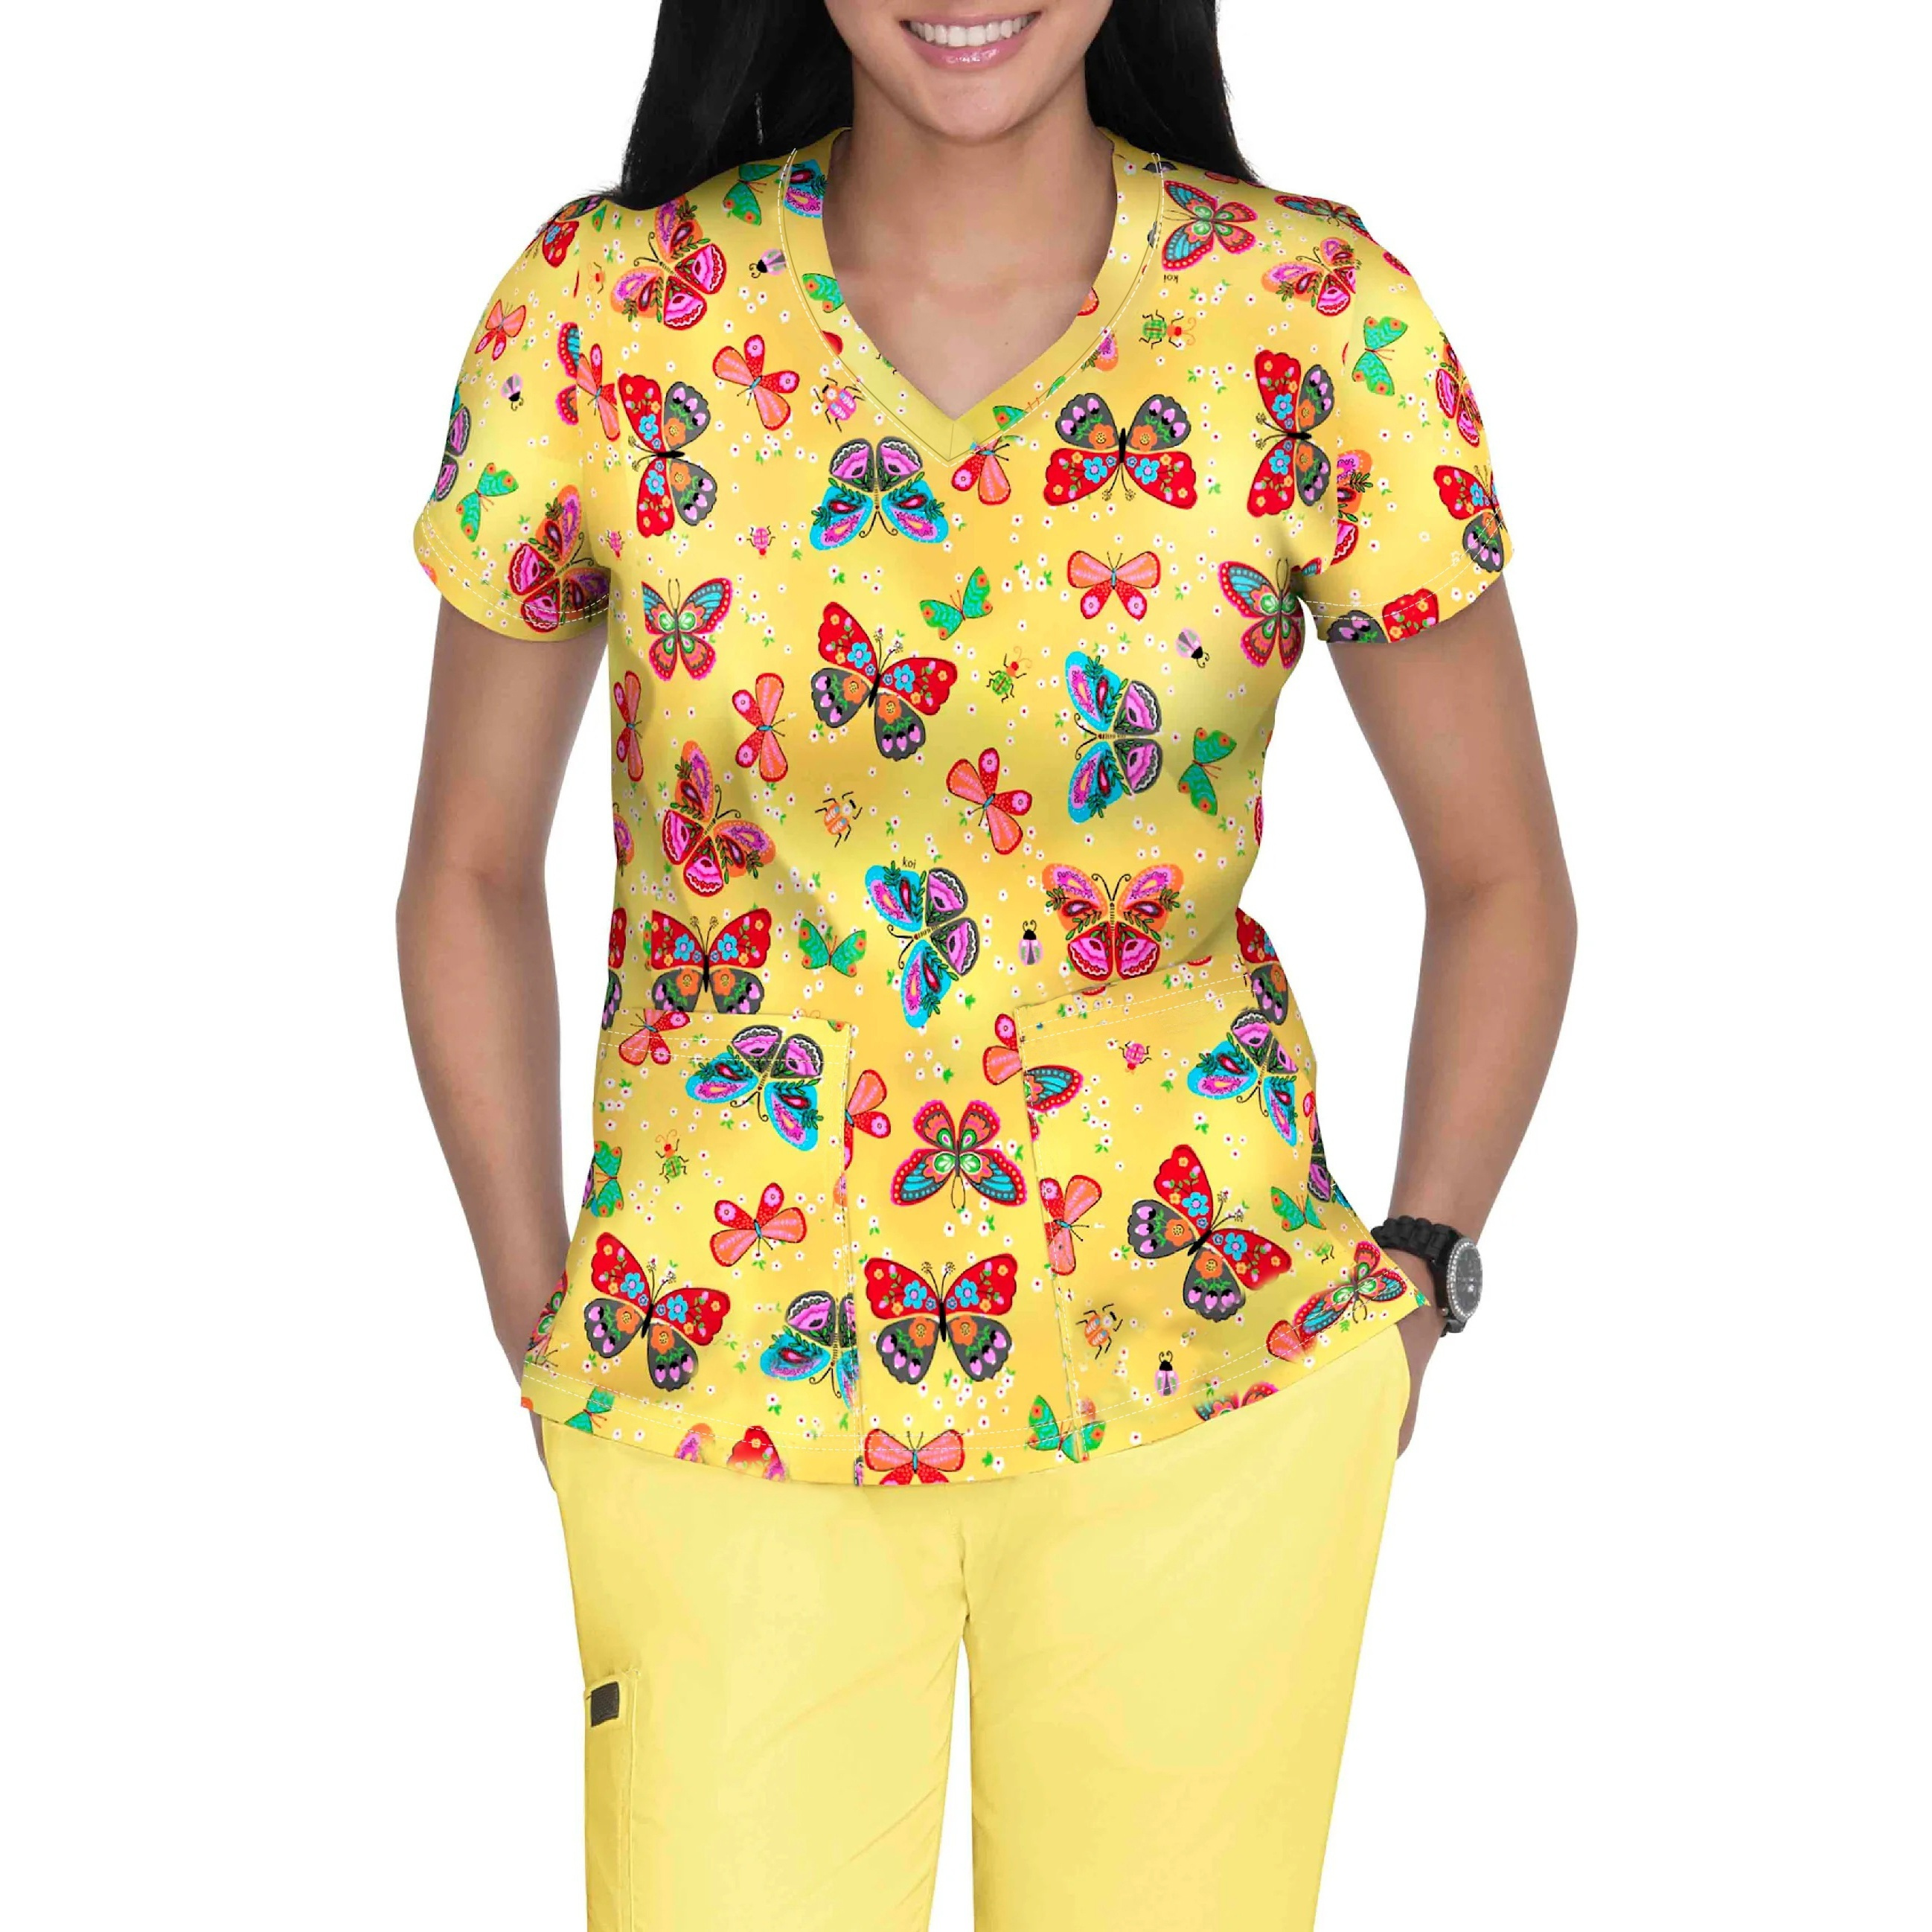 

Chic Butterfly Print V-neck Scrub Top For Women - Stretchy Nylon Blend, Short Sleeve With Pockets, Perfect For Nurses & Healthcare Professionals Flutter Sleeve Tops For Women For Women